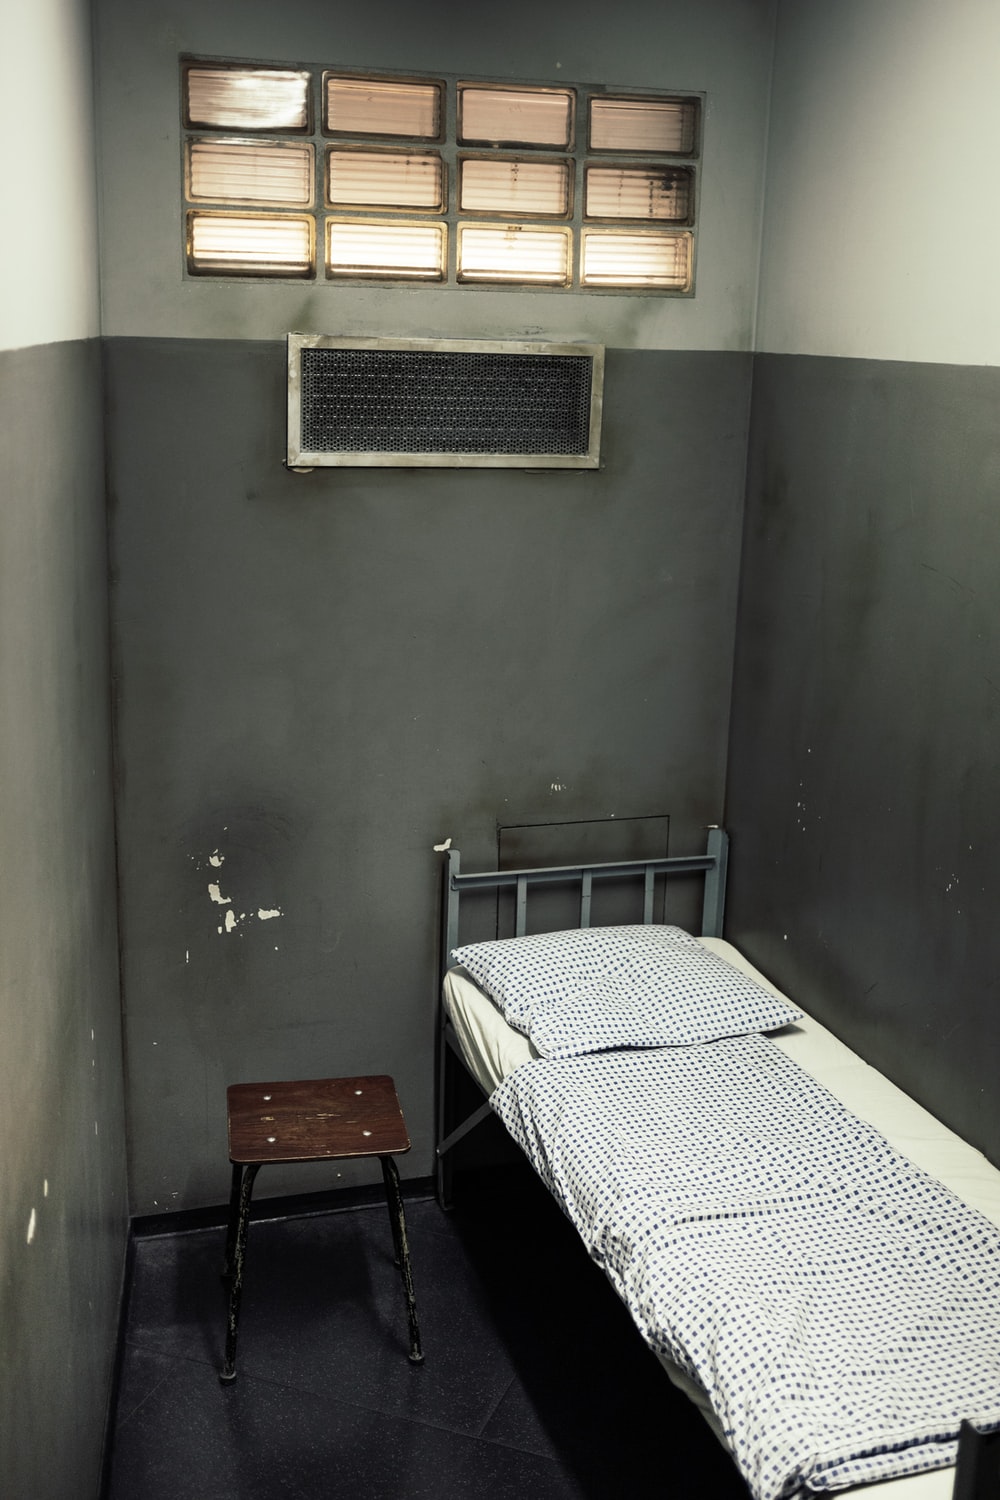 Prison Cell Picture. Download Free Image